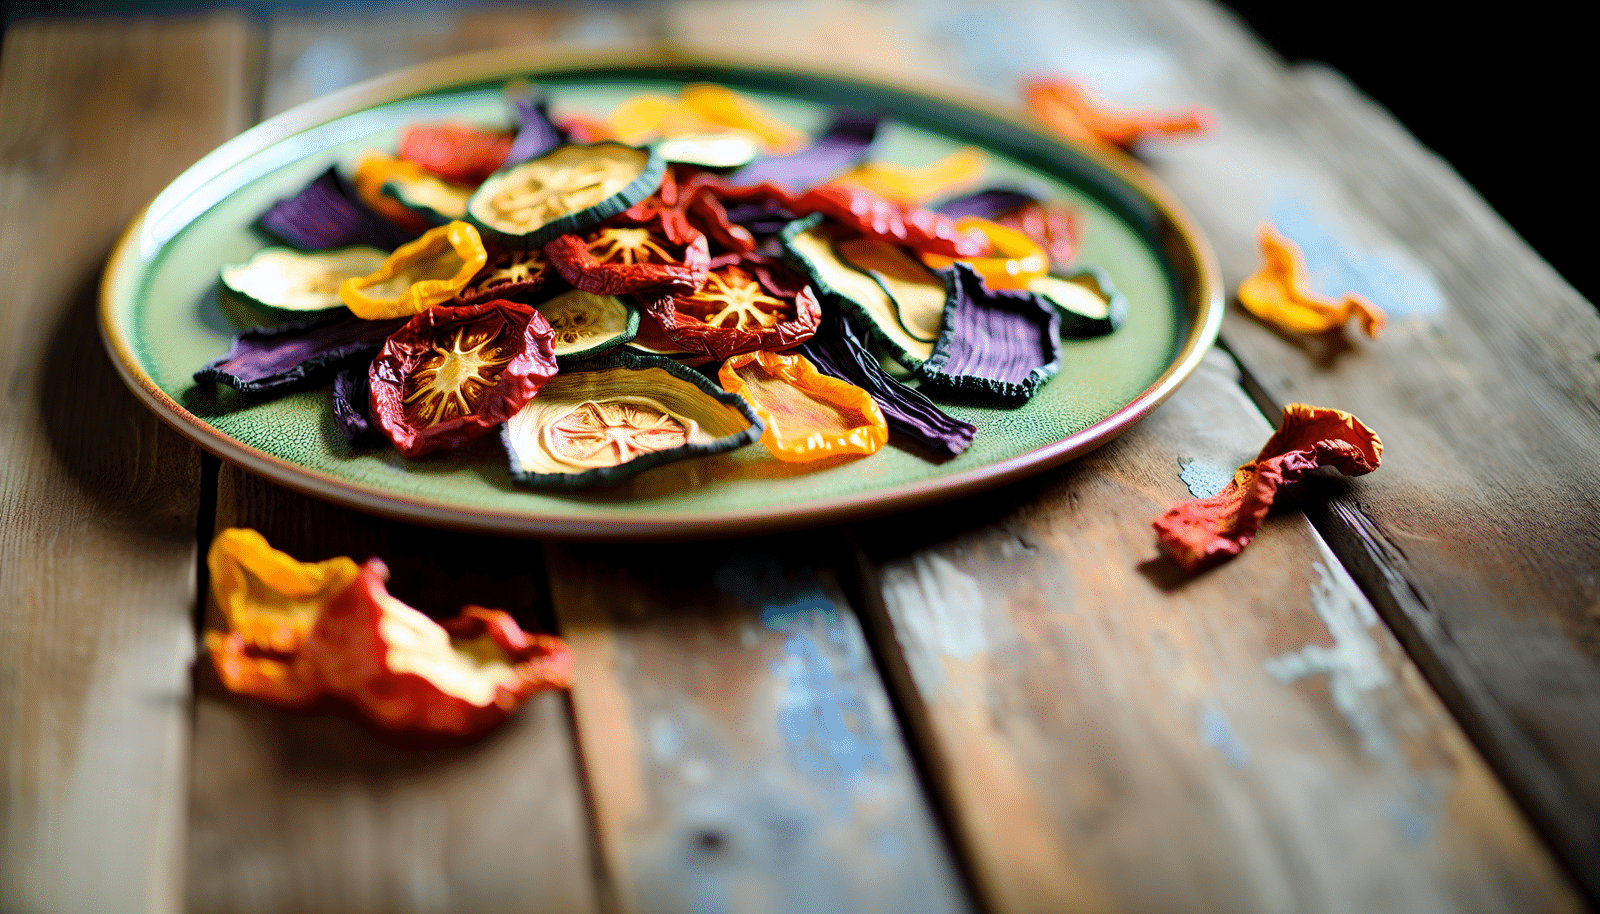 Creative dish made with oven-dried veggies